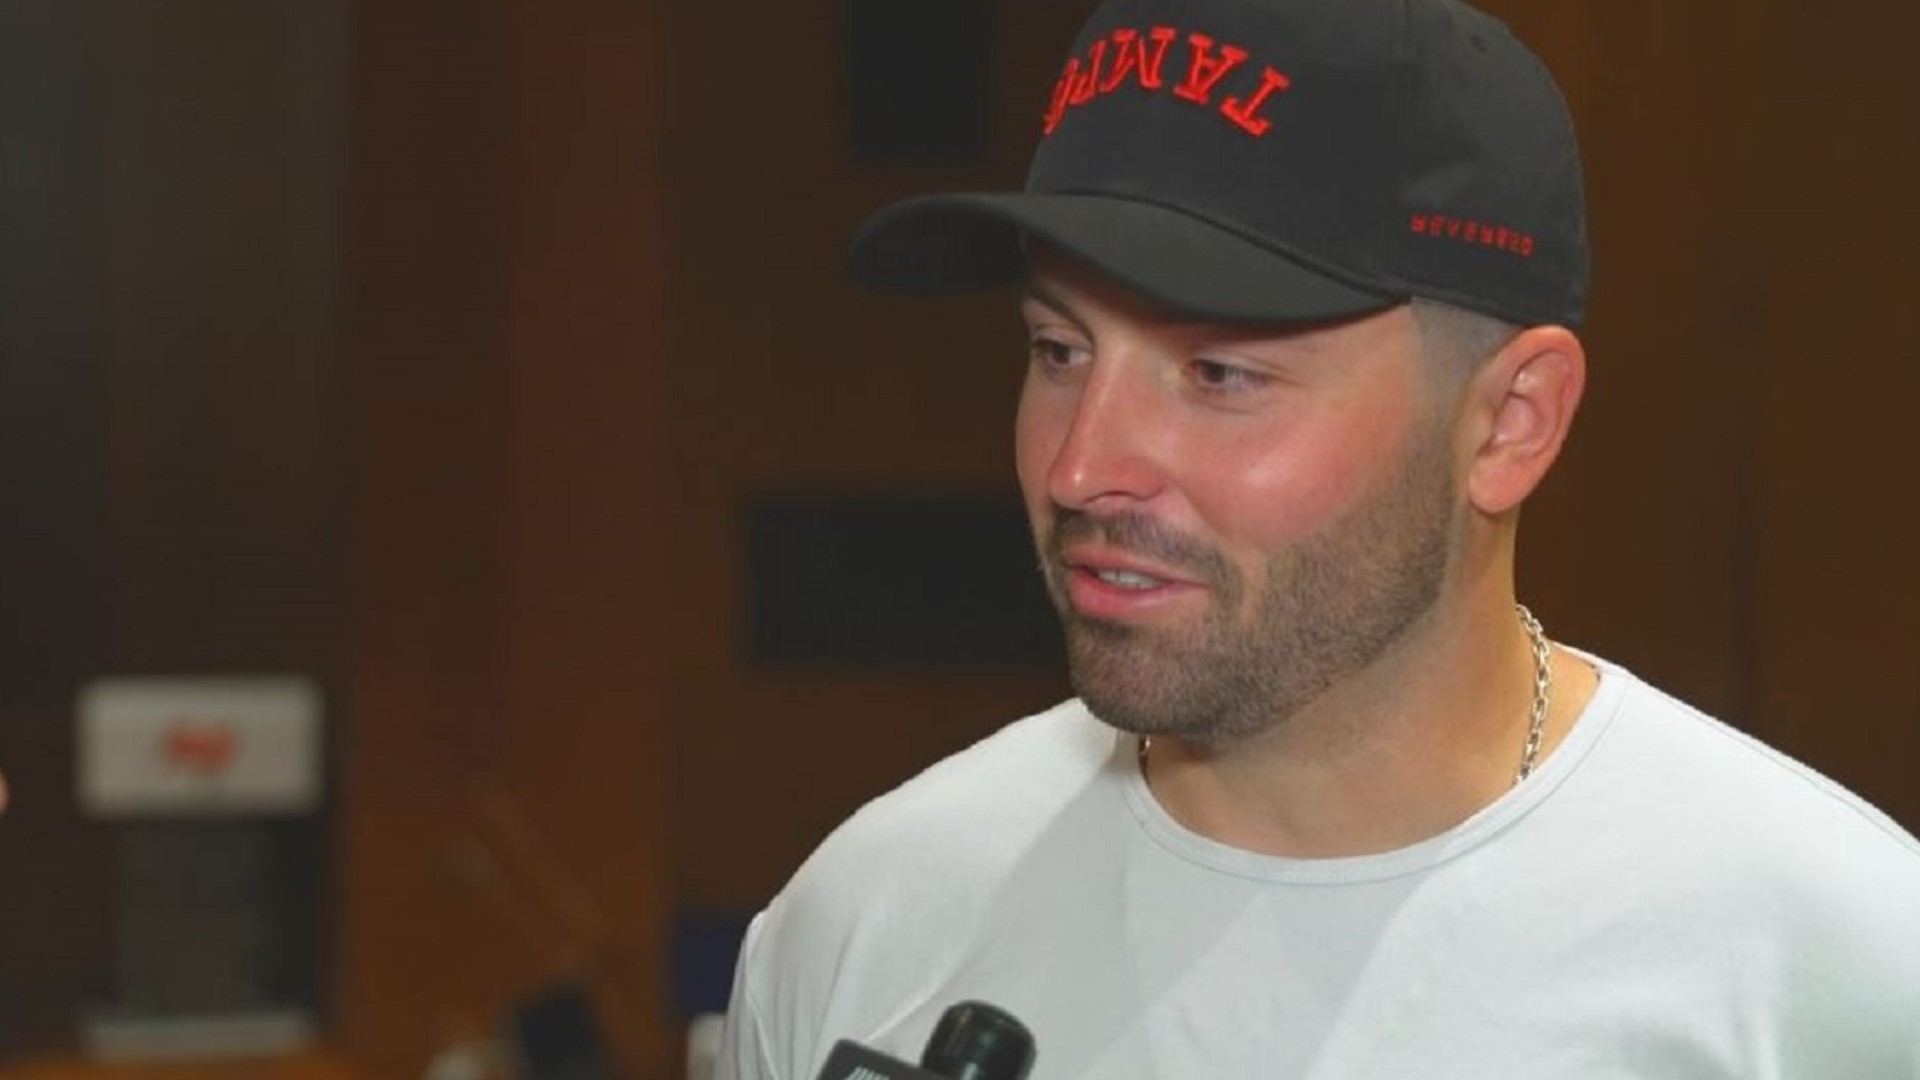 10 Tampa Bay Sports Director Evan Closky speaks with Mayfield on his new three-year deal with the Tampa Bay Buccaneers.